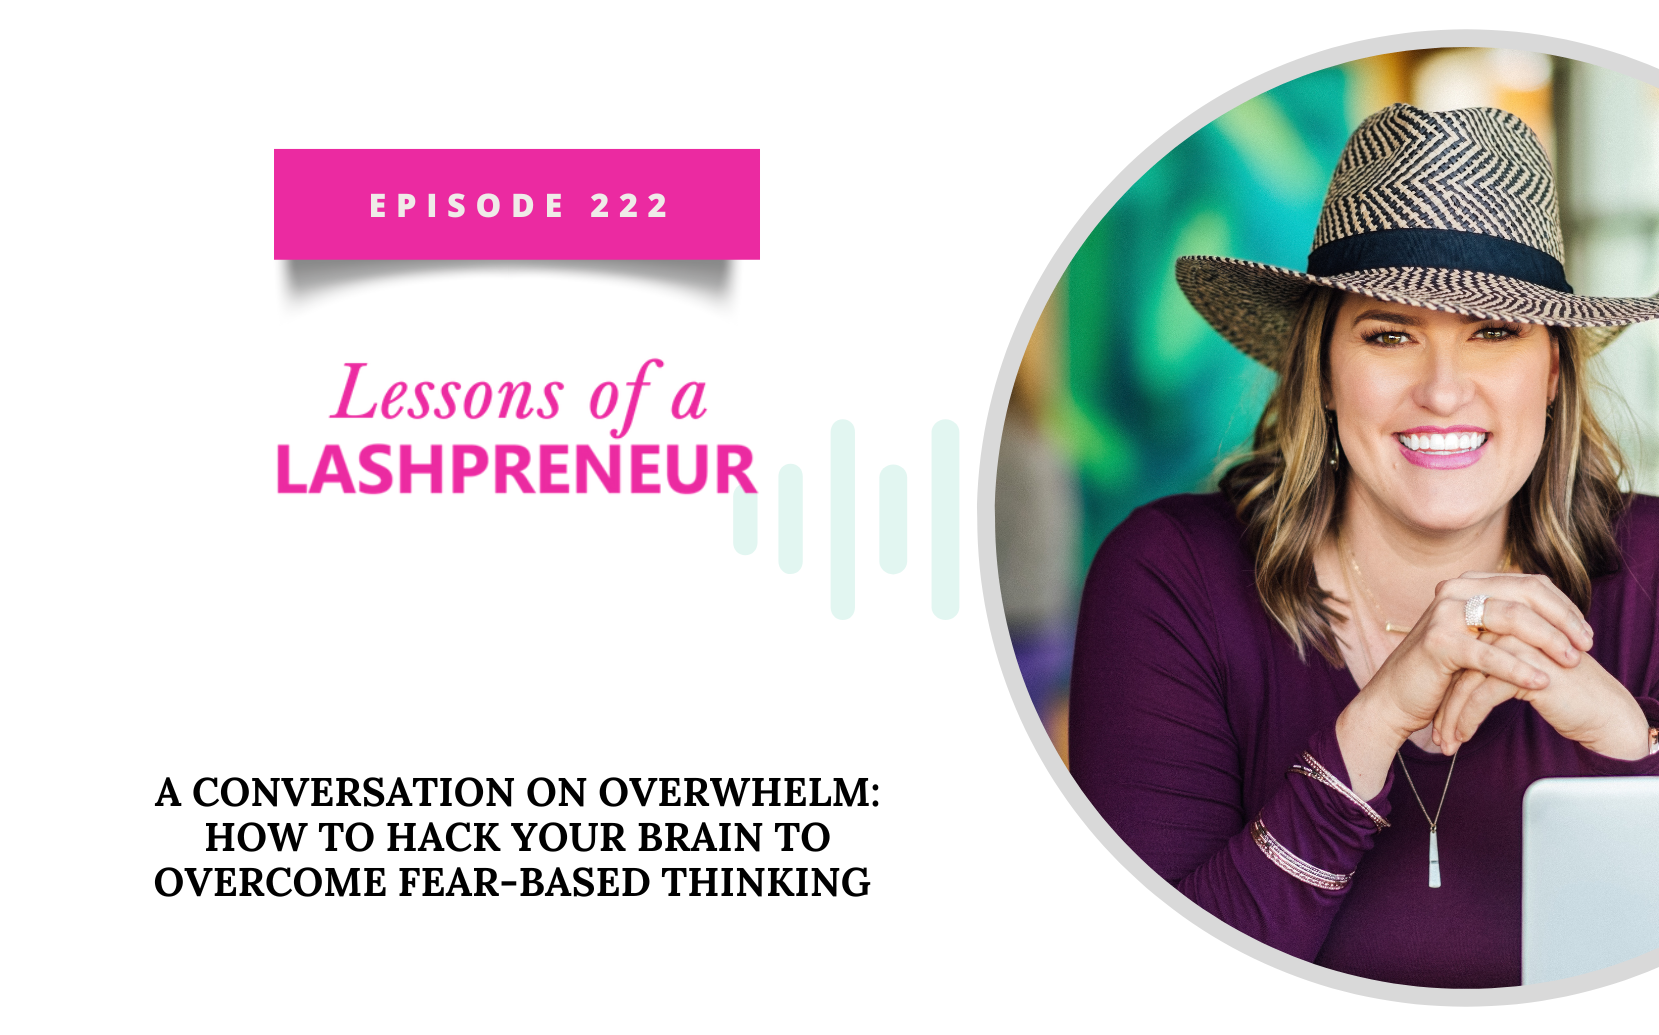 A Conversation On Overwhelm: How to Hack Your Brain to Overcome Fear-Based Thinking